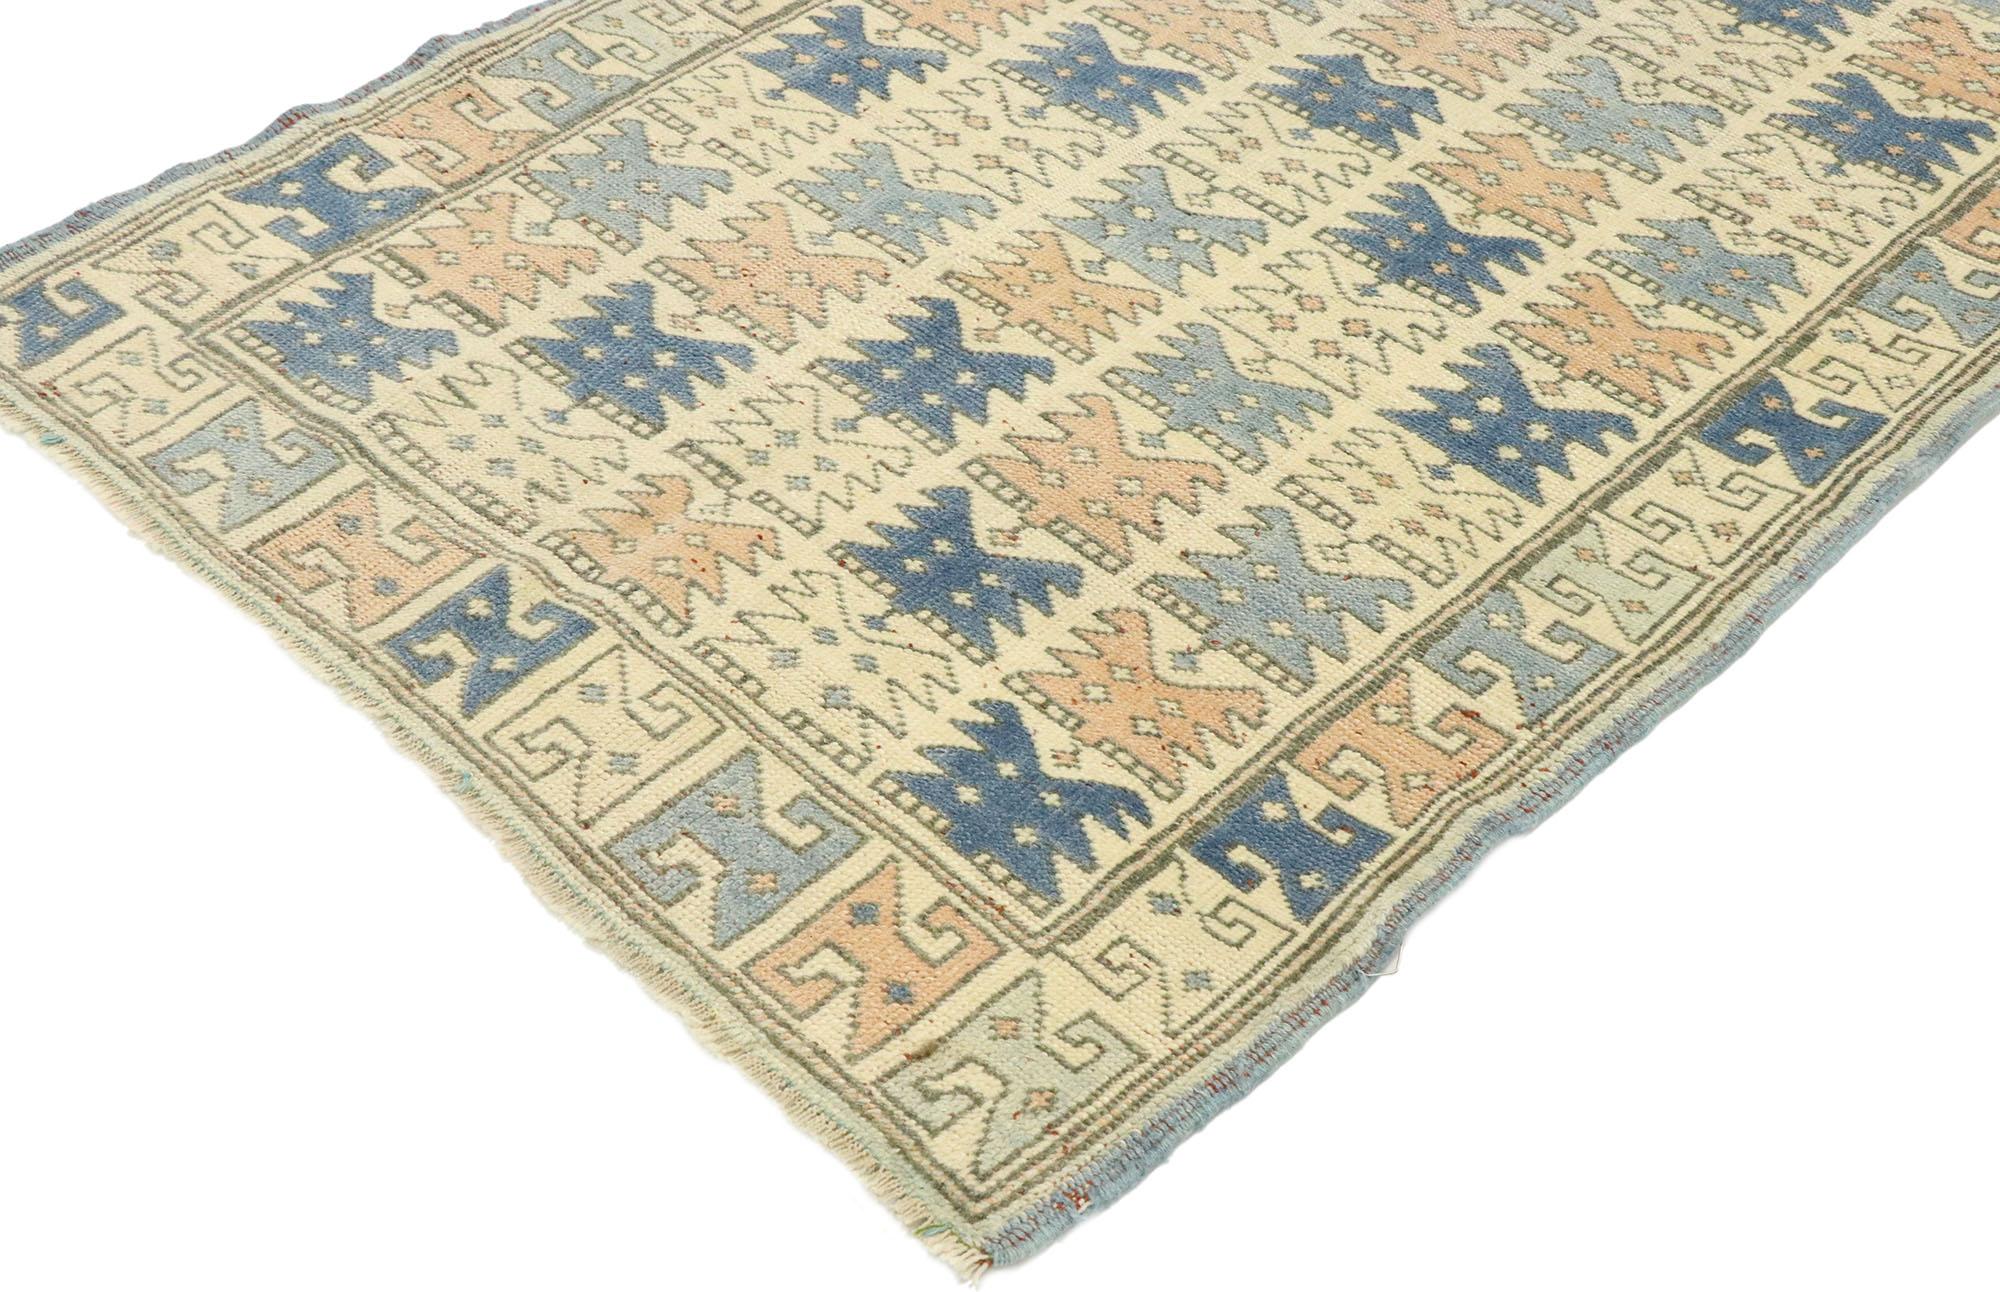 53144, vintage Turkish Oushak runner with Modern Georgian style. With its well-balanced symmetry and hues in harmony, this hand knotted wool vintage Turkish Oushak runner beautifully embodies a romantic Georgian style. The abrashed beige field